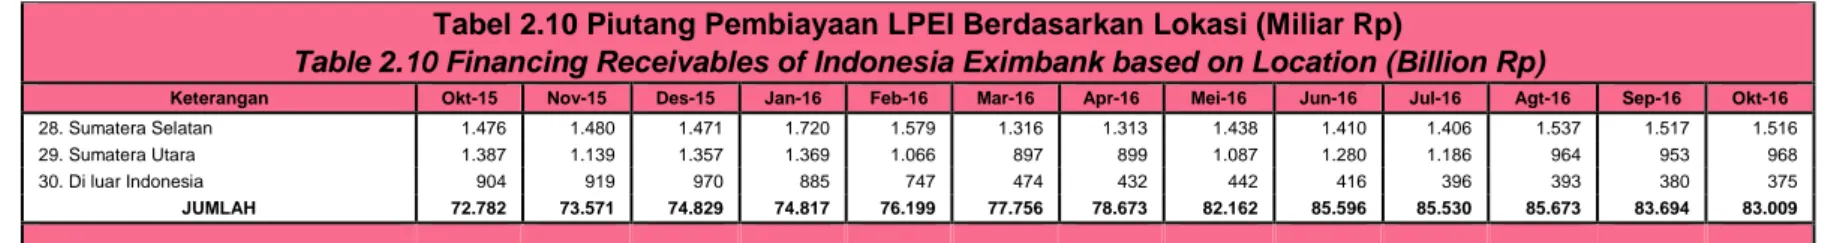 Table 2.10 Financing Receivables of Indonesia Eximbank based on Location (Billion Rp) 